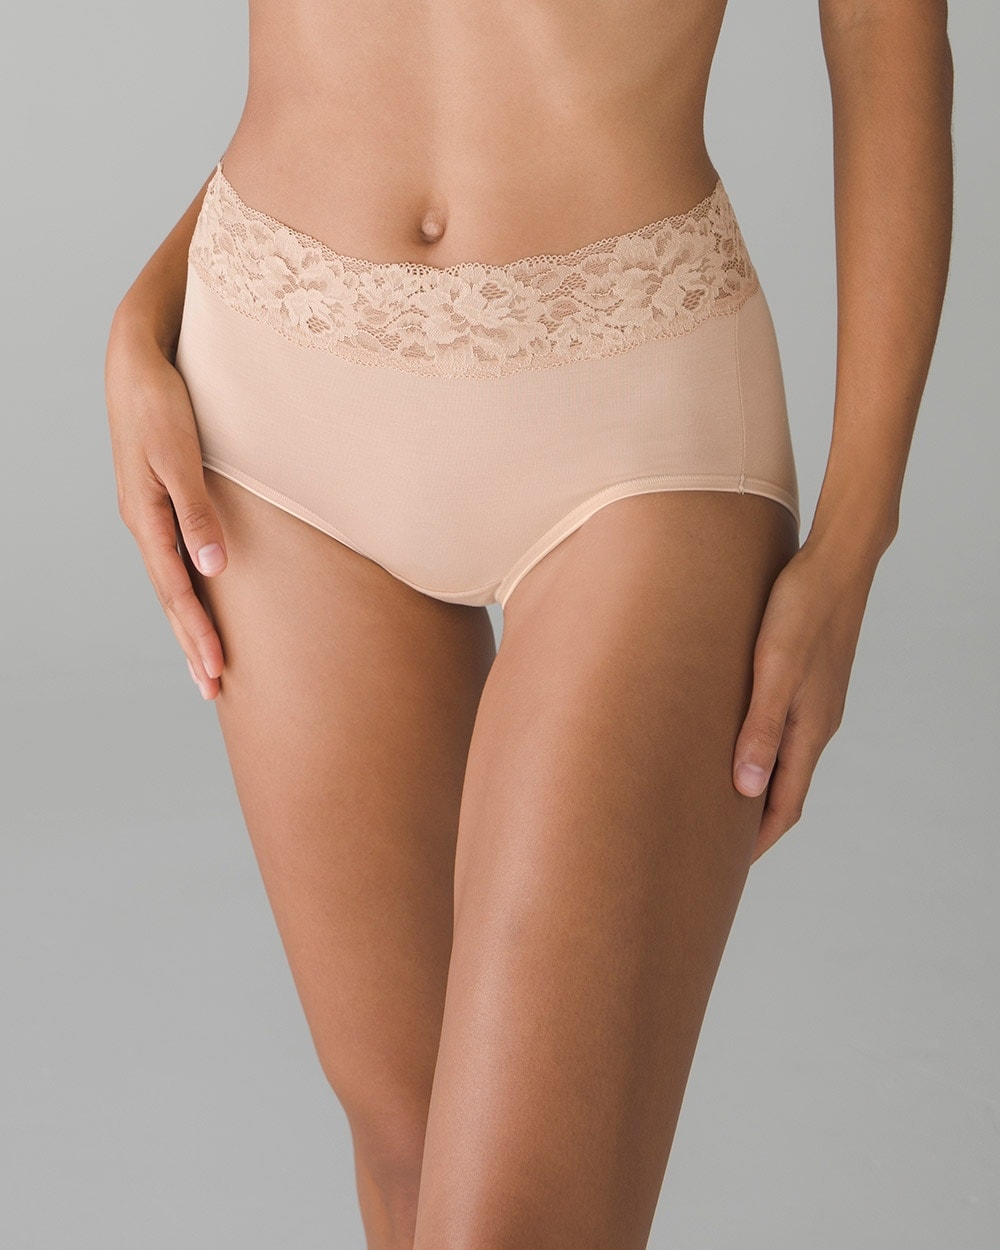 1-Pack Seamless Undies - Ultra silky, barely there feel (Please order